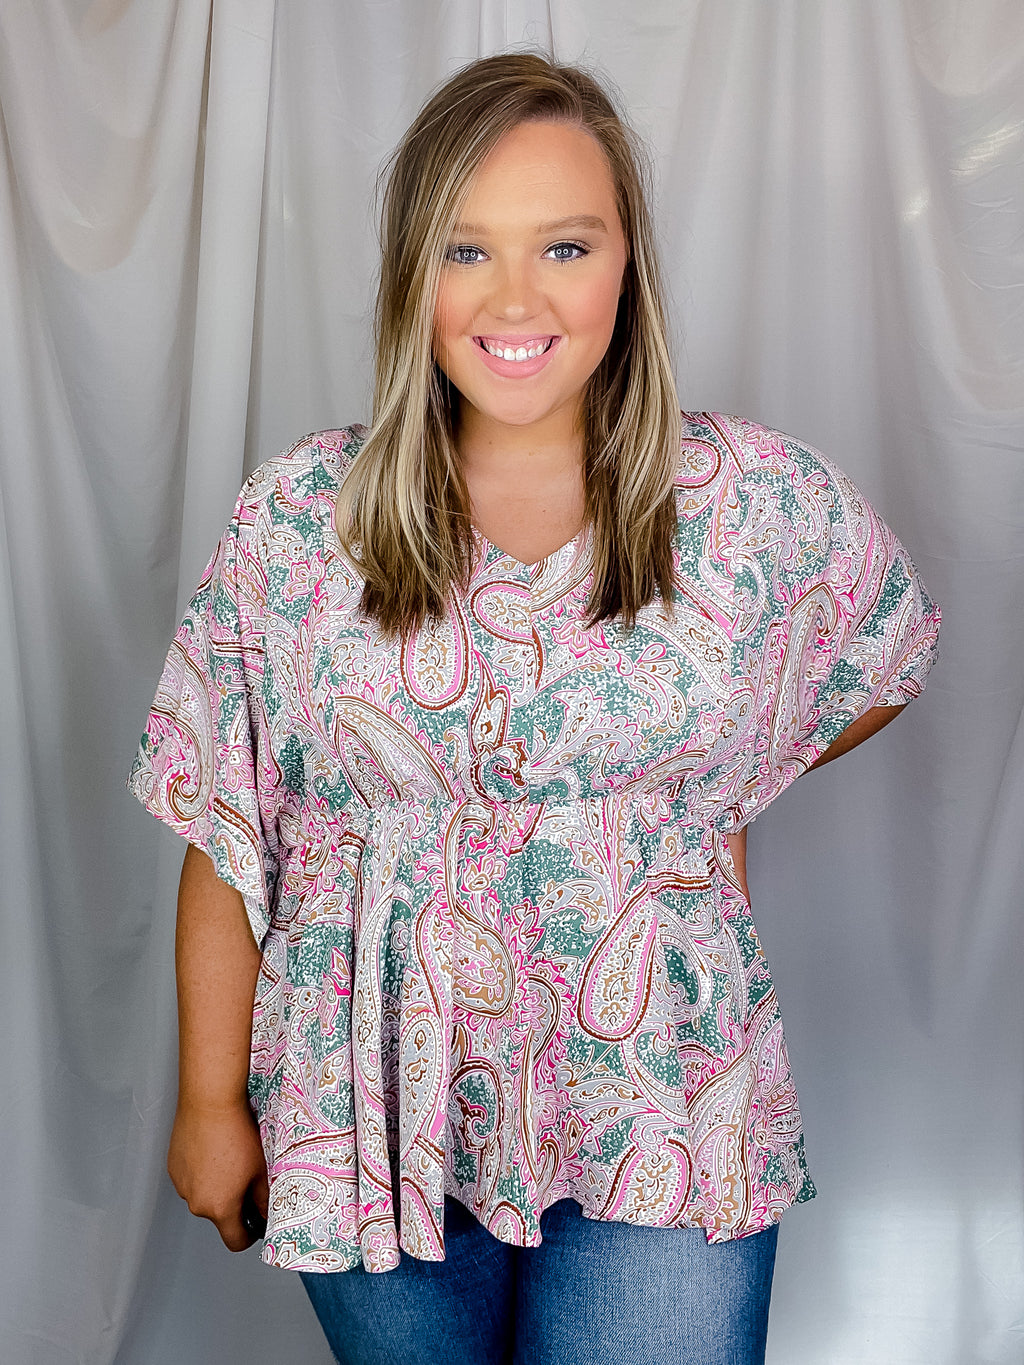 Top features a paisley printed detail, elastic waist band, short dolman sleeves, V-neck line and runs true to size! 